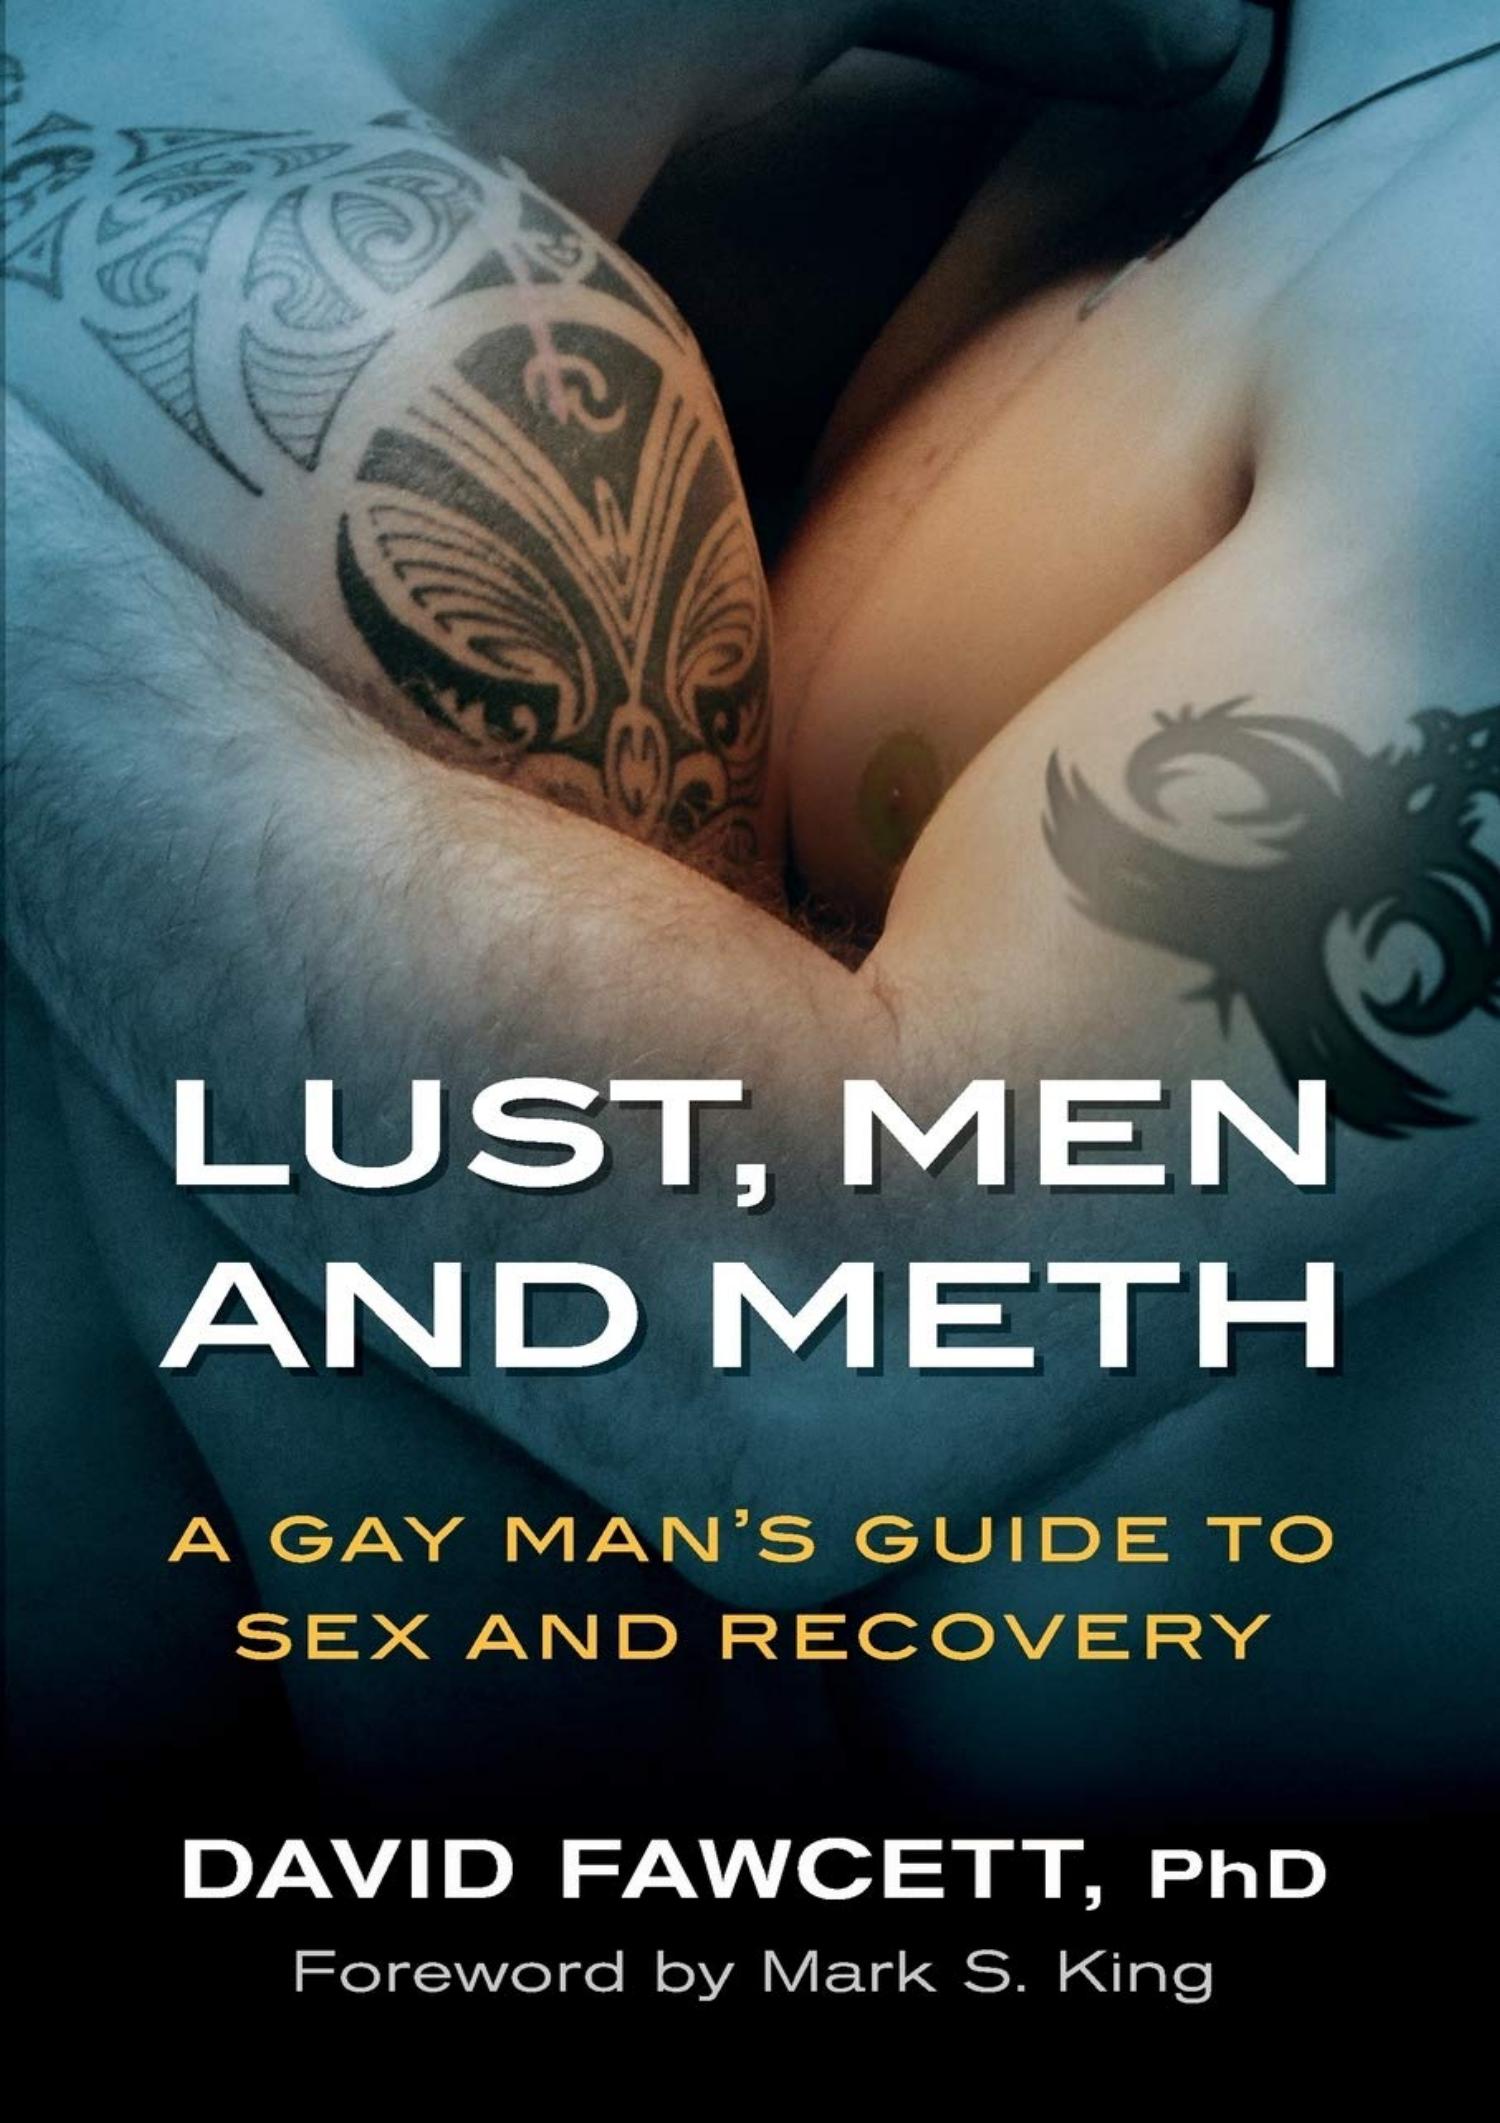 Lust Men and Meth A Gay Man s Guide to Sex and Recovery.pdf | DocDroid